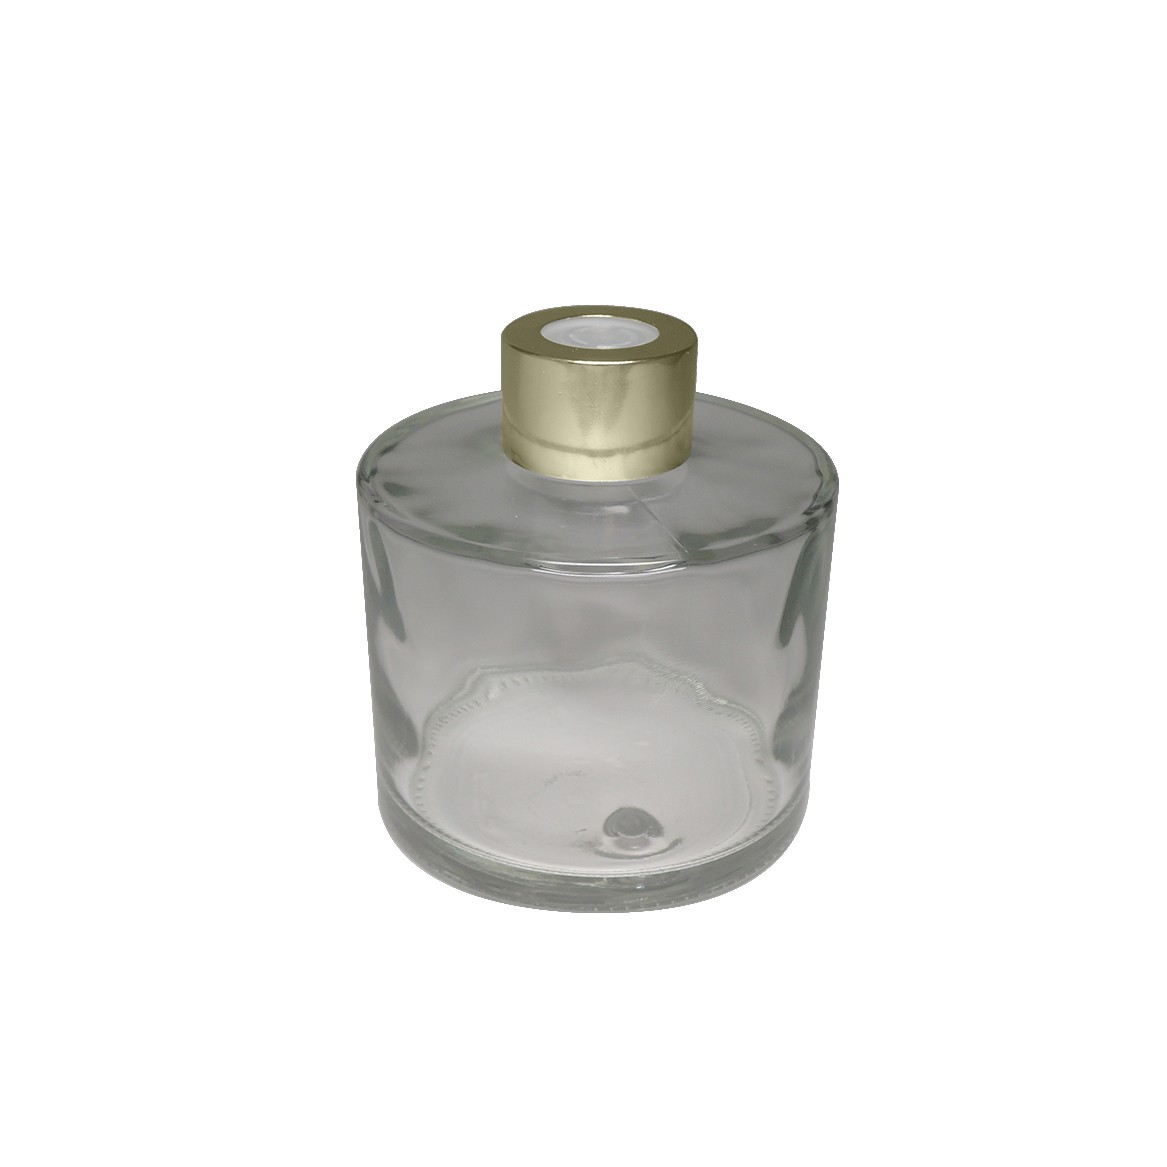 Feel Fragrance Glass Diffuser Bottles Diffuser Jars with Caps Fragrance Accessories Use for DIY